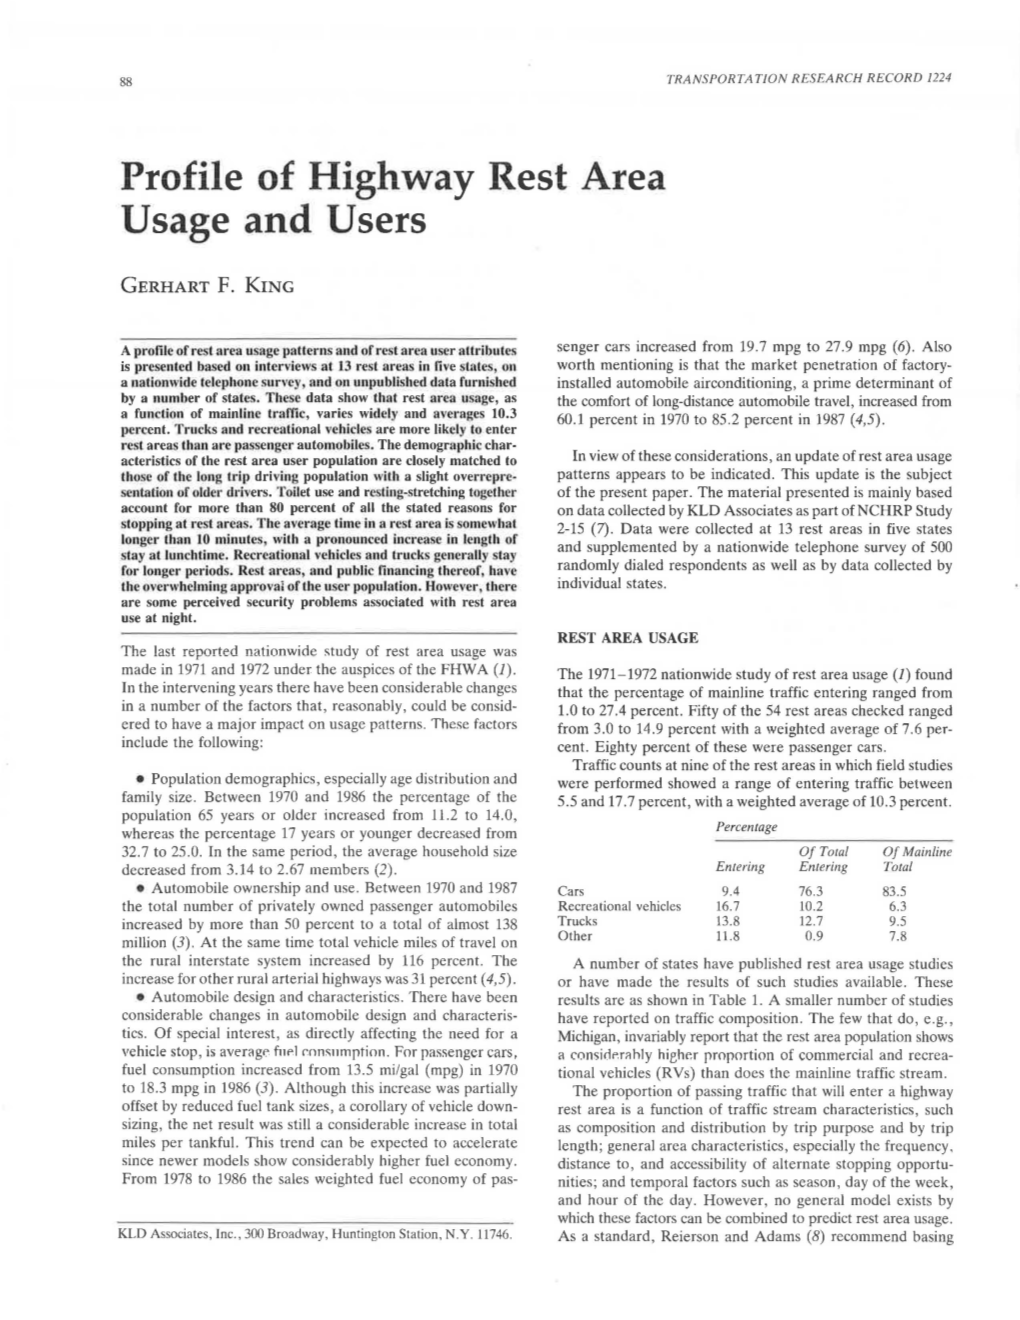 Profile of Highway Rest Area Usage and Users